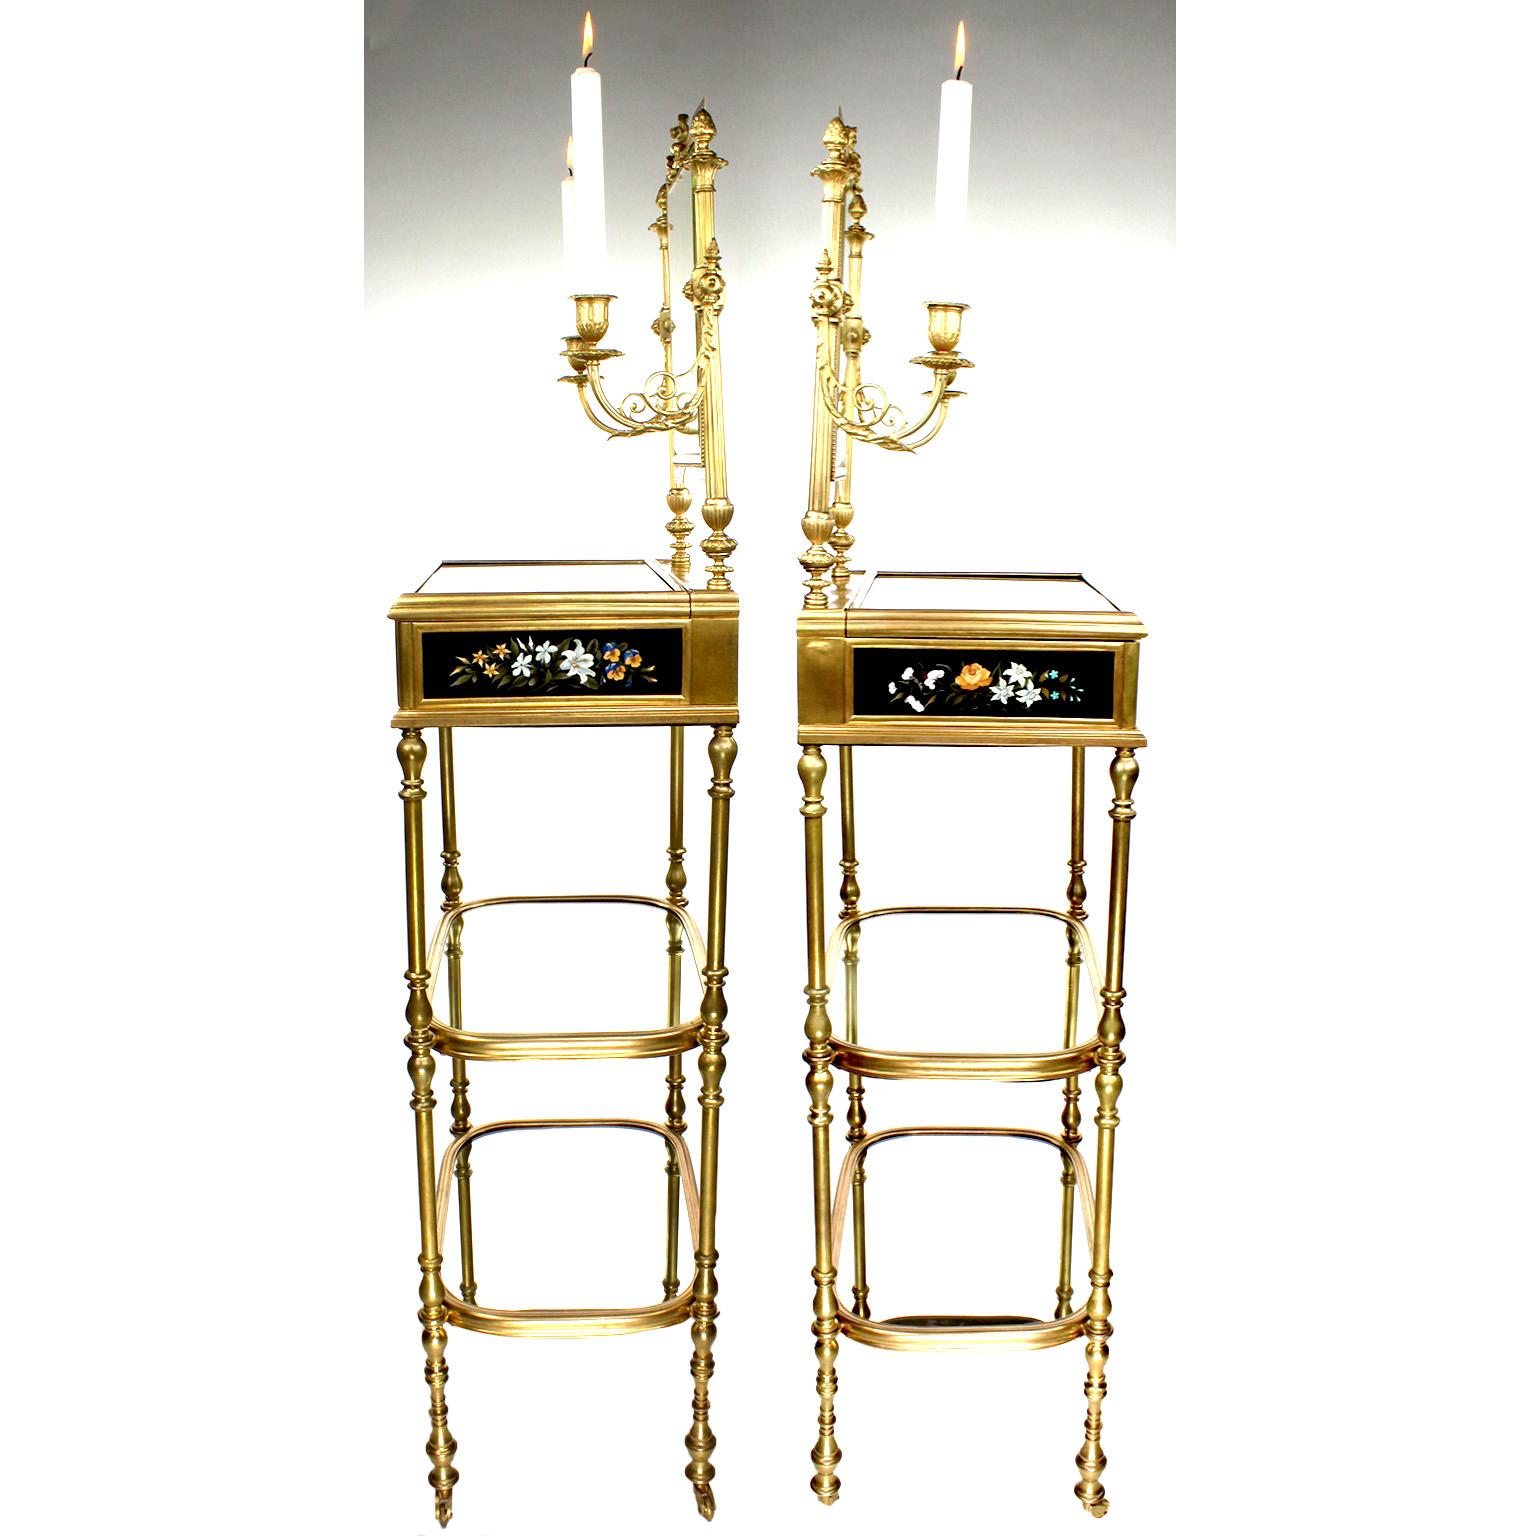 French 19th Century Gilt-Bronze and Pietra Dura Vanity Stand, Attr. Tahan, Paris For Sale 8